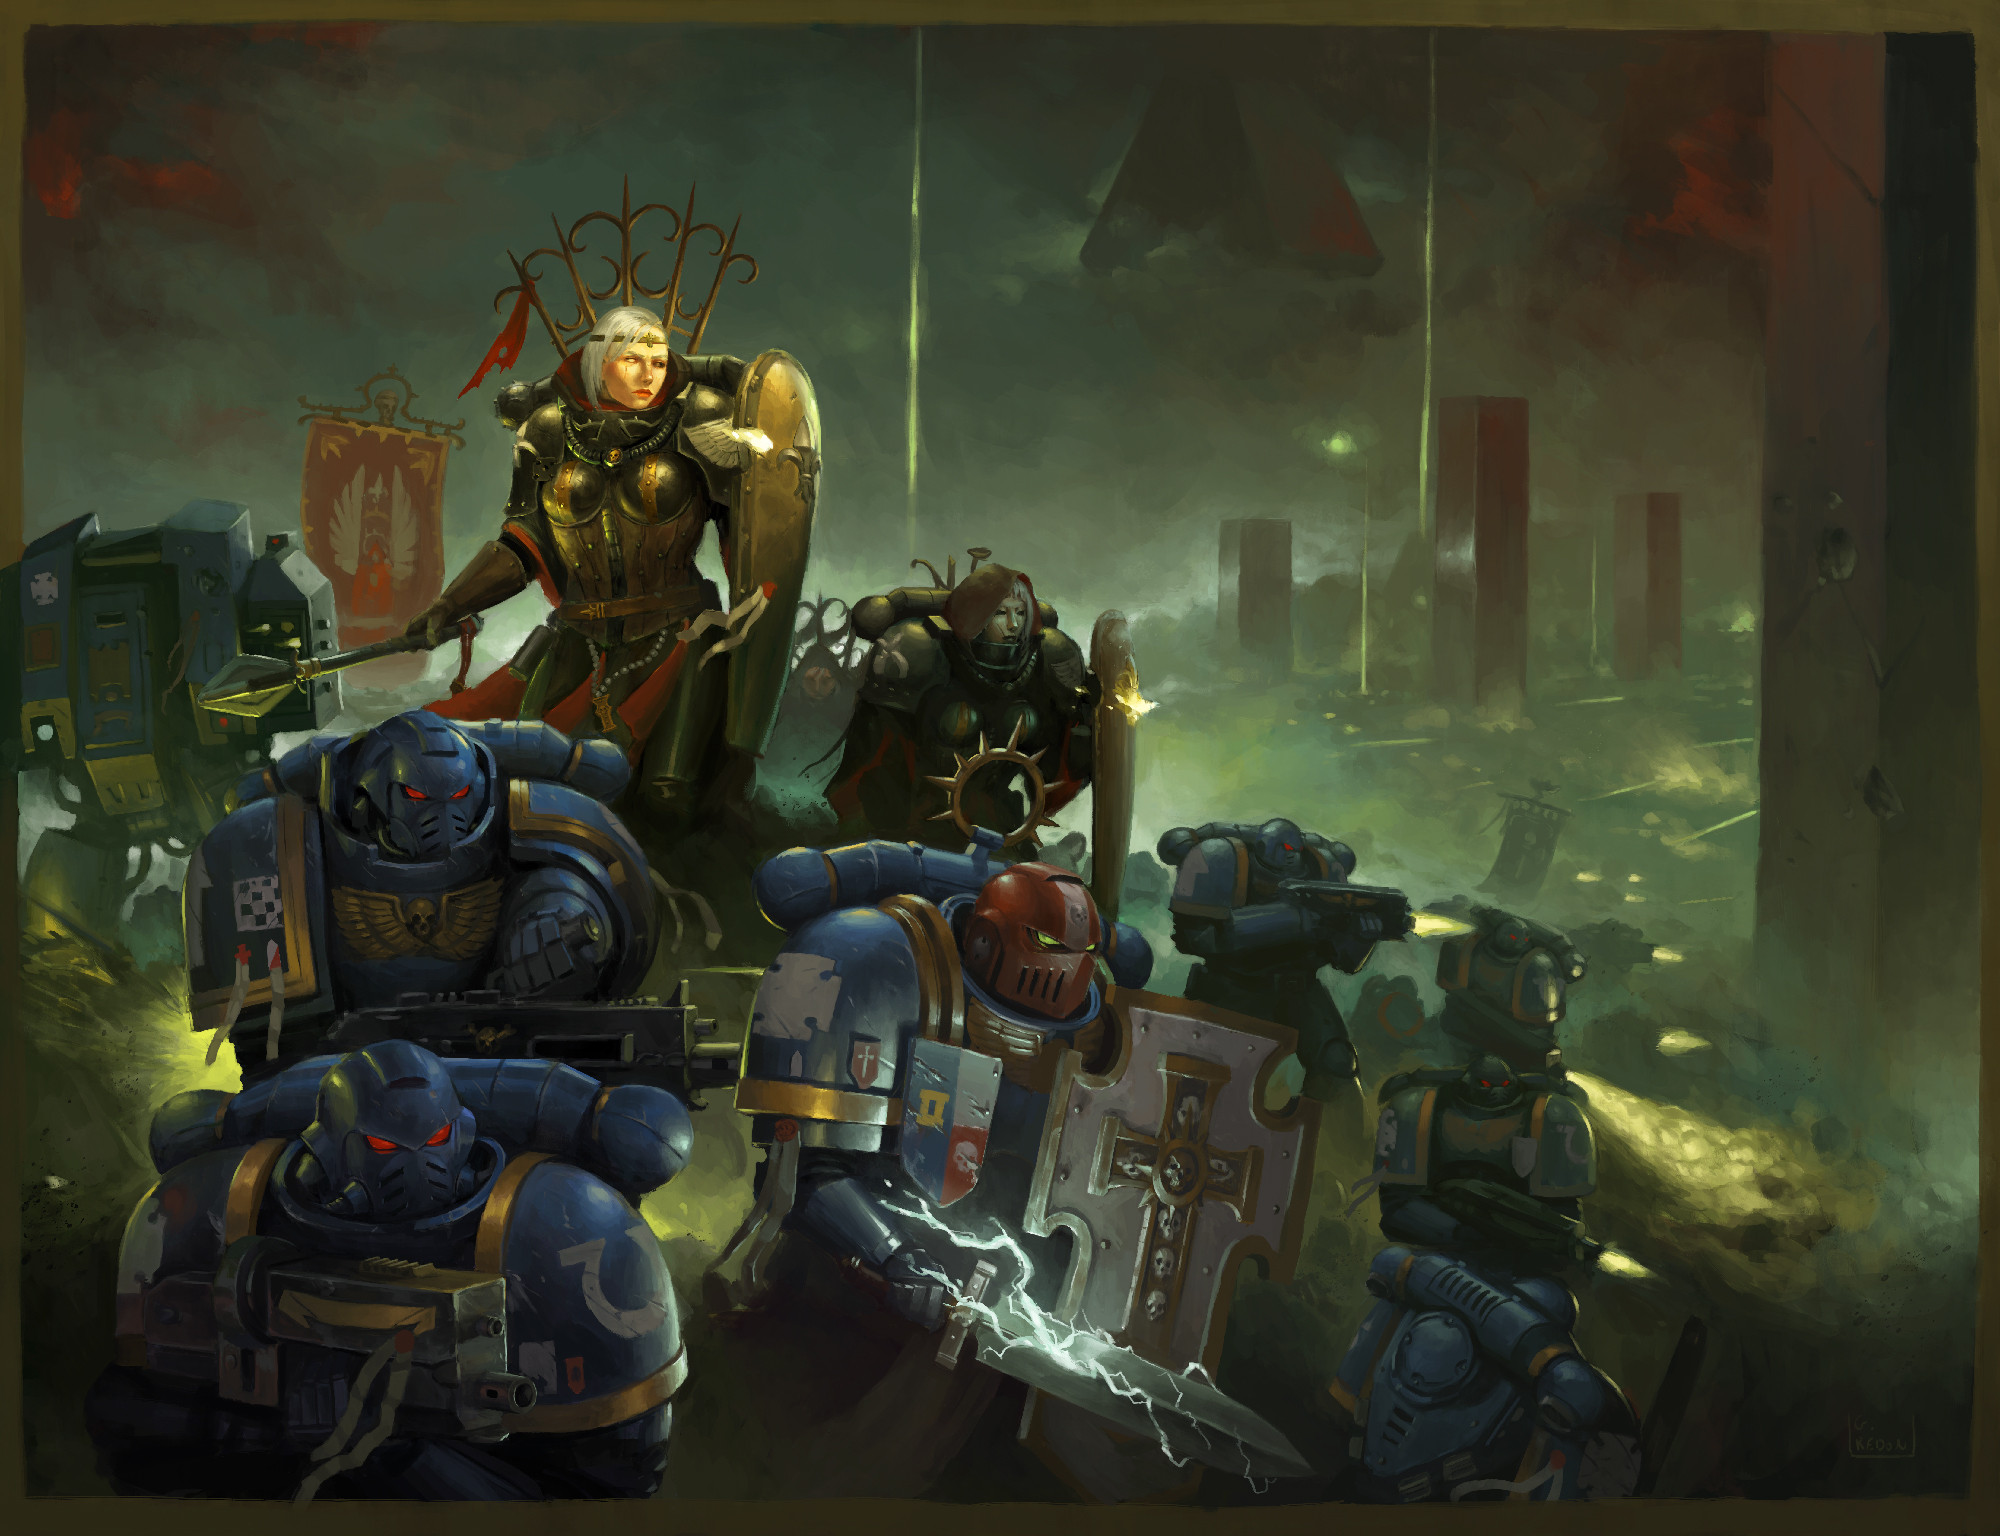 General 2000x1536 science fiction high tech Warhammer 40,000 space marines Ultramarines Necrons bolter gun battle war green gold blue white red Dreadnought power sword tomb world Sisters of Battle Adepta Sororitas video games video game art video game characters